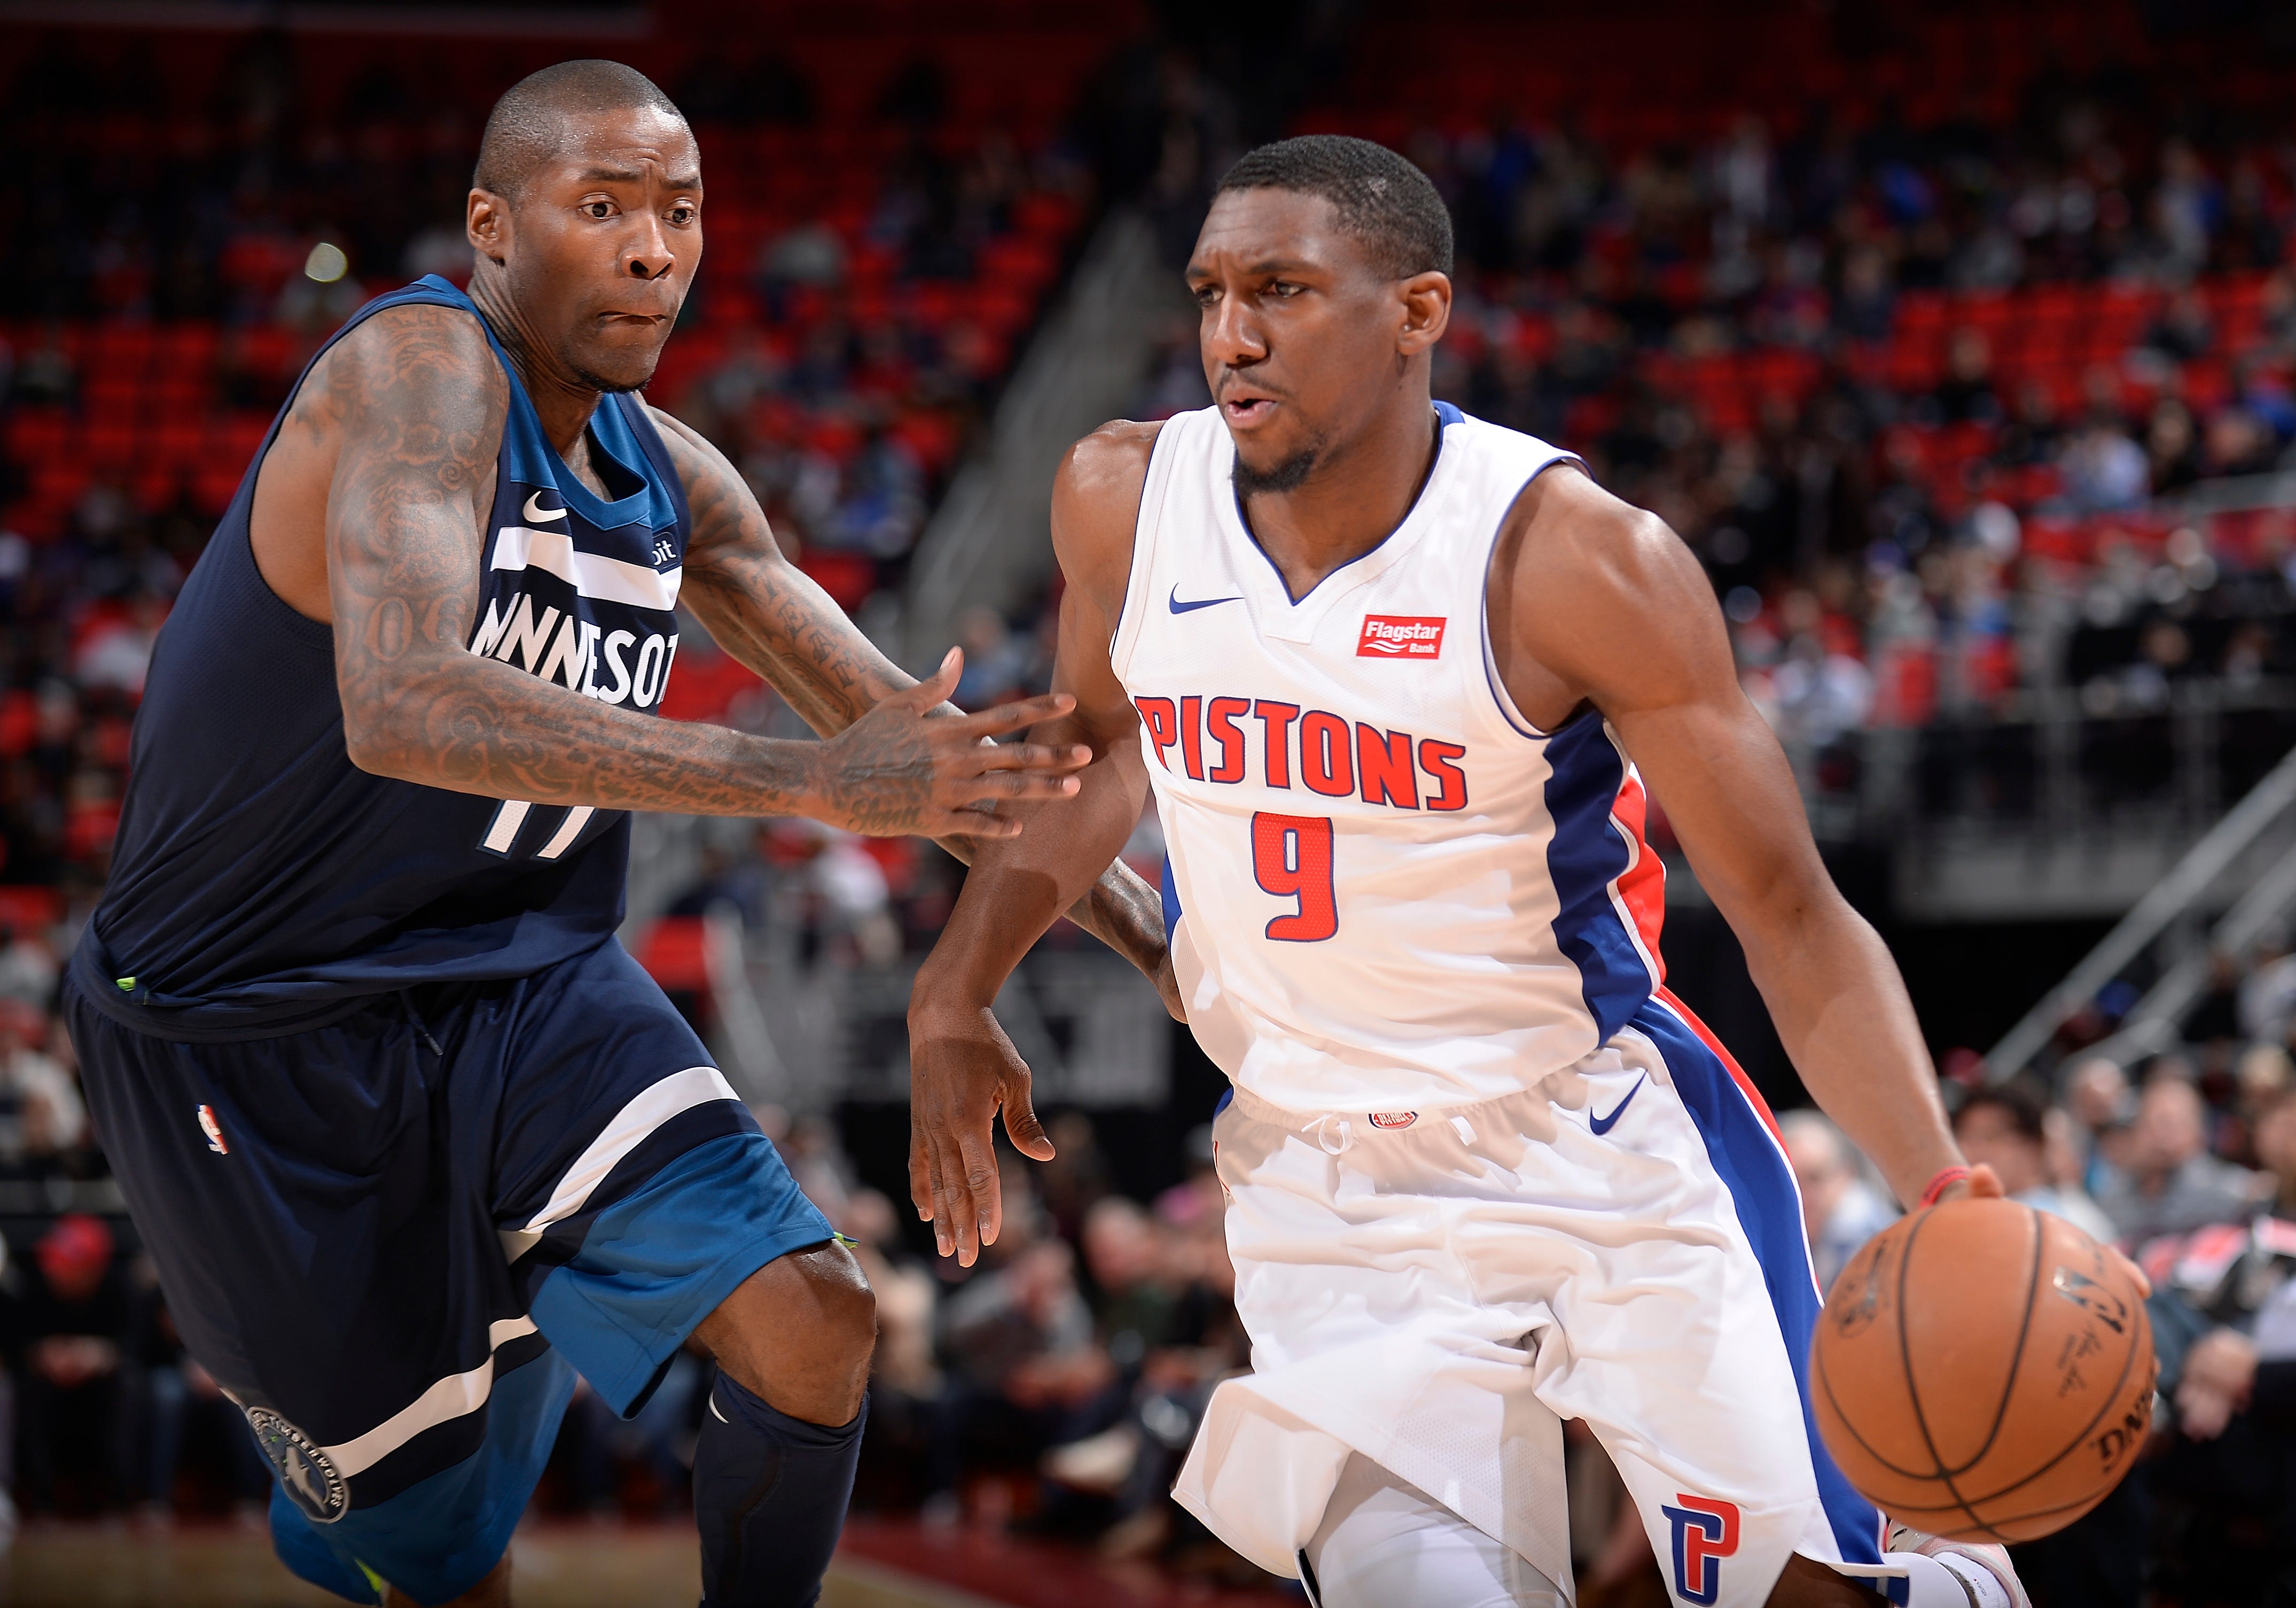 14. Langston Galloway, G: Originally pegged as a combo guard, Galloway didn’t get much of a chance to show what he could do as a point guard. Even worse, he fell behind Reggie Bullock and Luke Kennard as an option at shooting guard. He’s a streaky shooter on a team that simply needed consistency. This will be a big year to try to regain some of that traction.